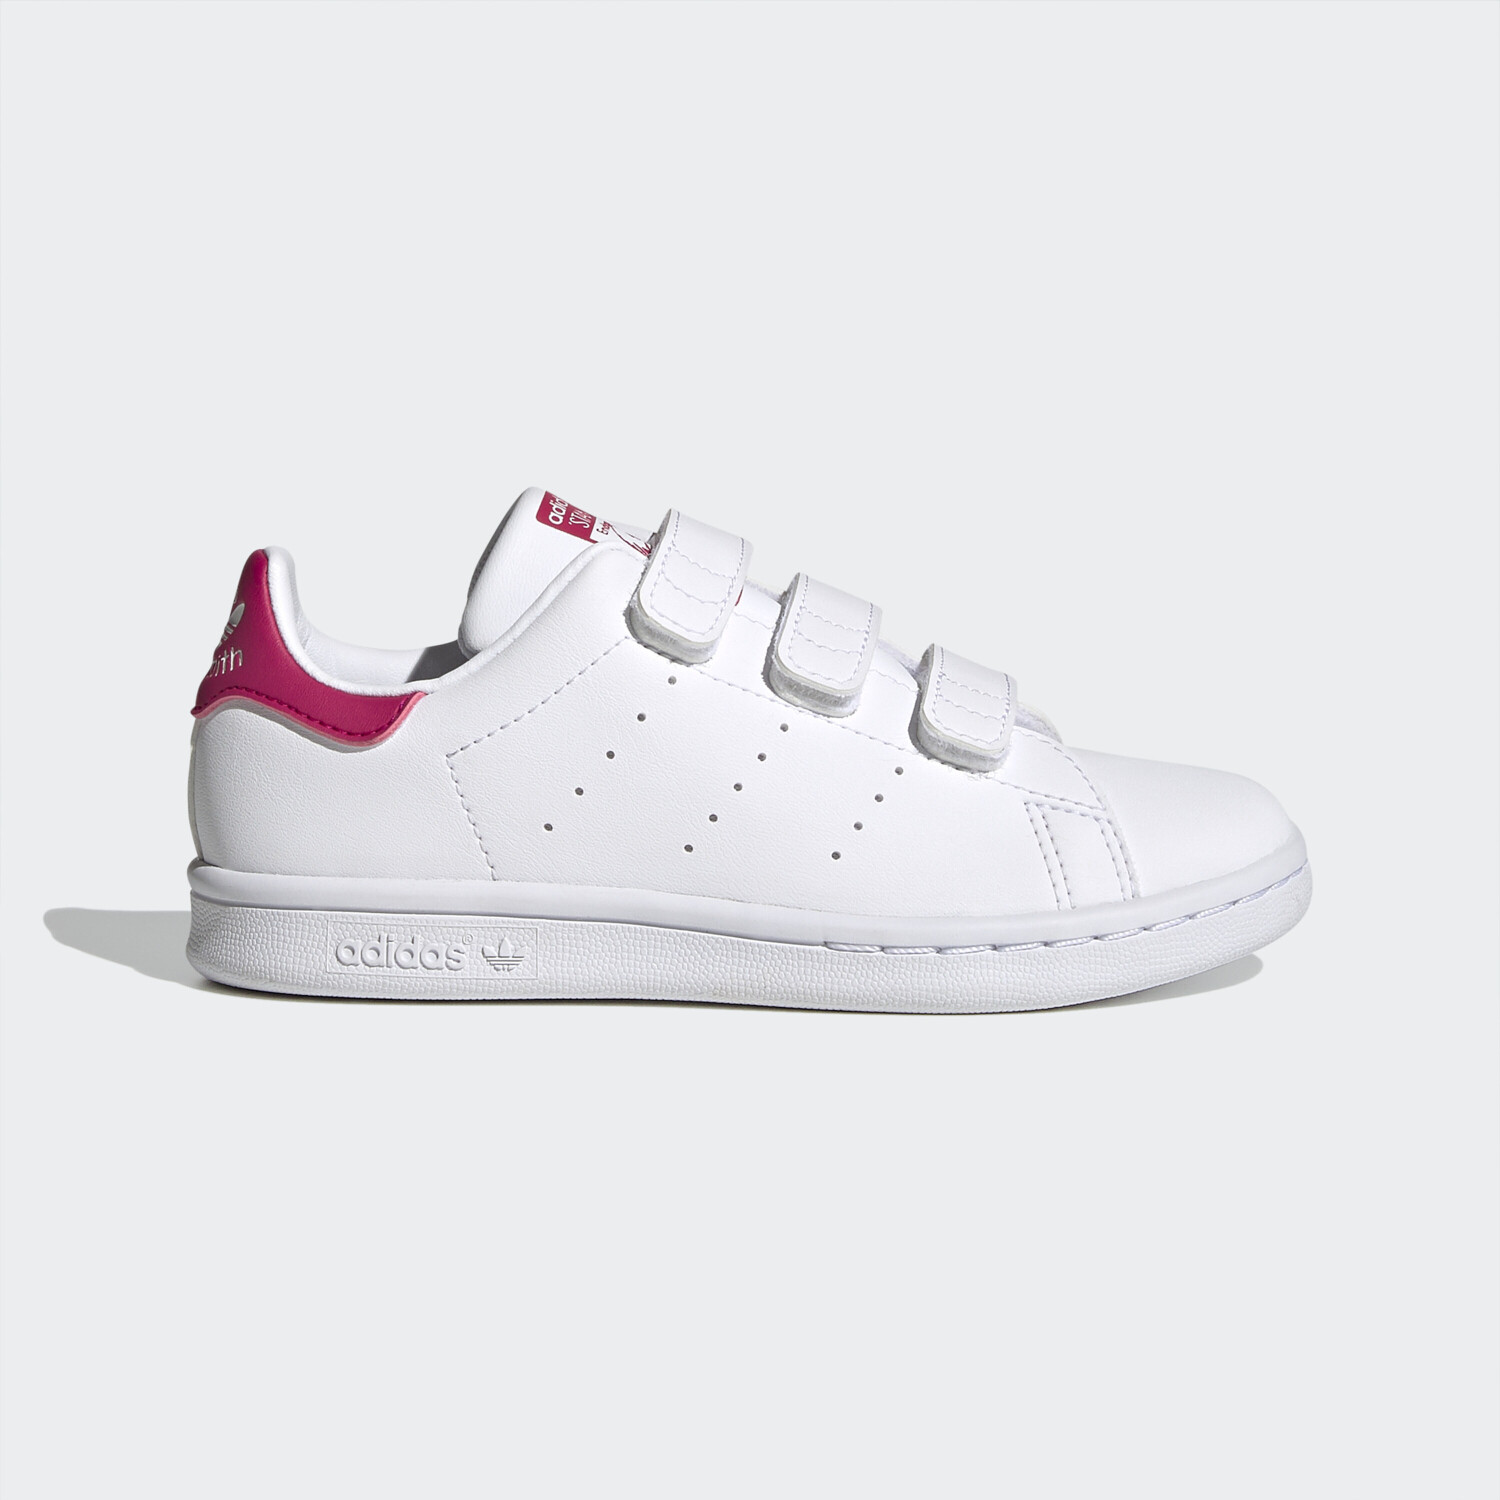 Best Smith Stan on from White/Cloud £32.50 Buy – White/Bold Cloud Deals (Today) Adidas Pink Kinder